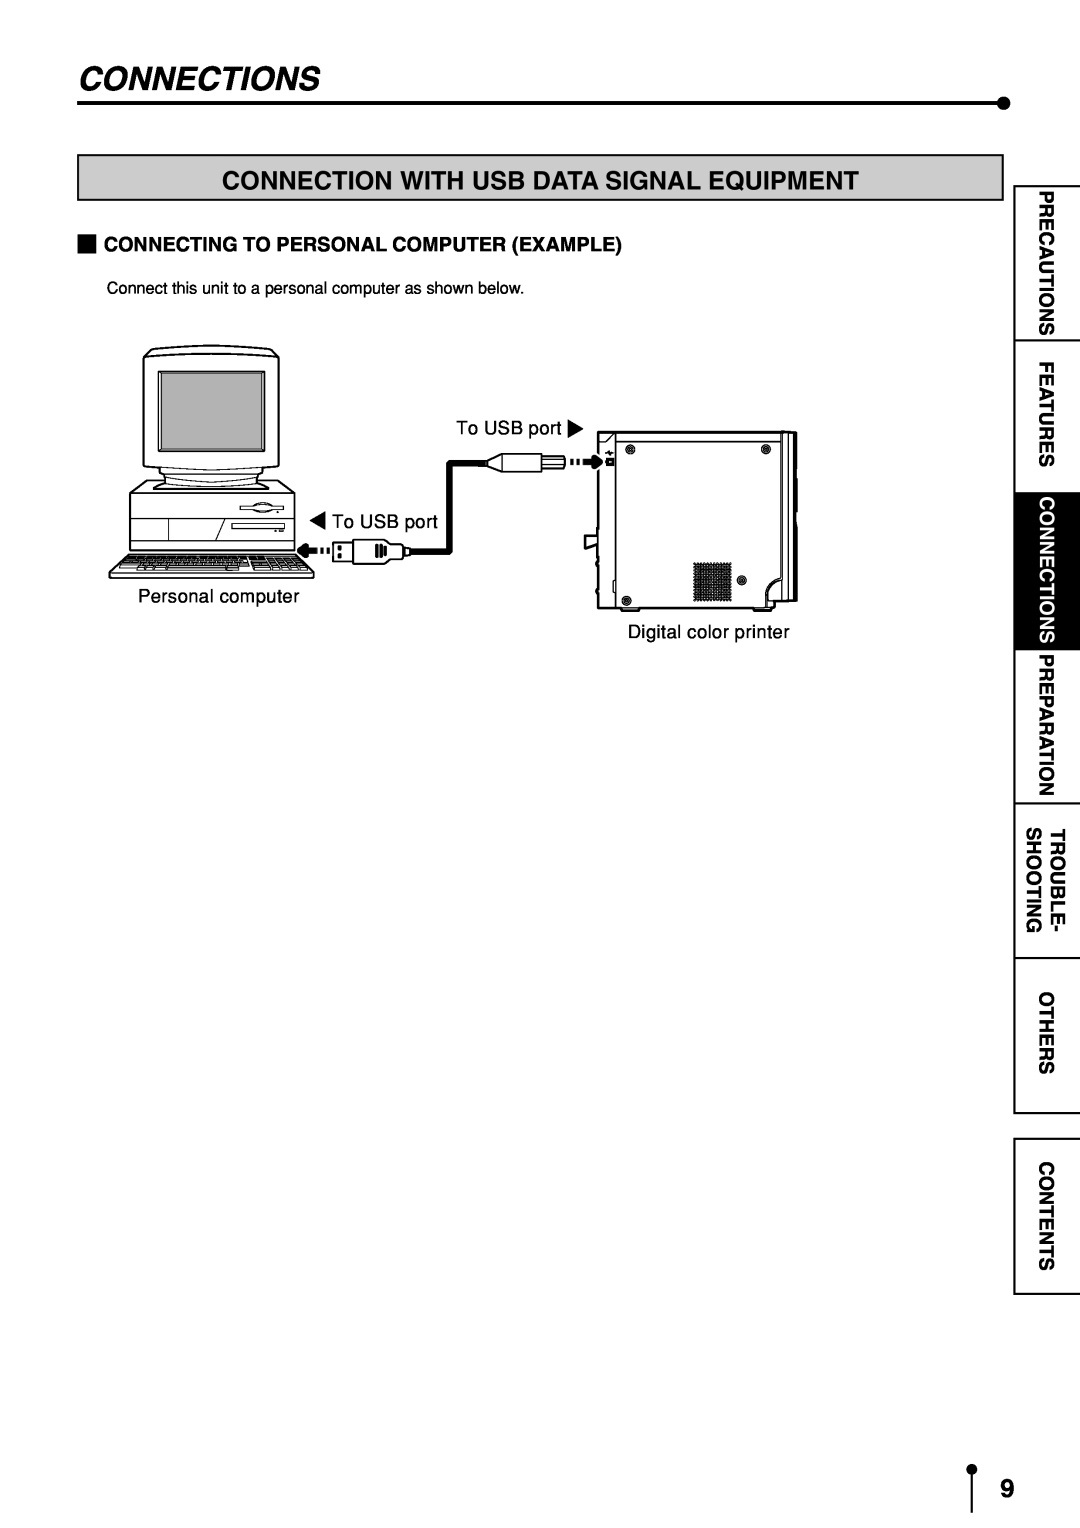 Mitsubishi Electronics CP9600DW-S Connections, Connection With Usb Data Signal Equipment, Contents, To USB port, Others 